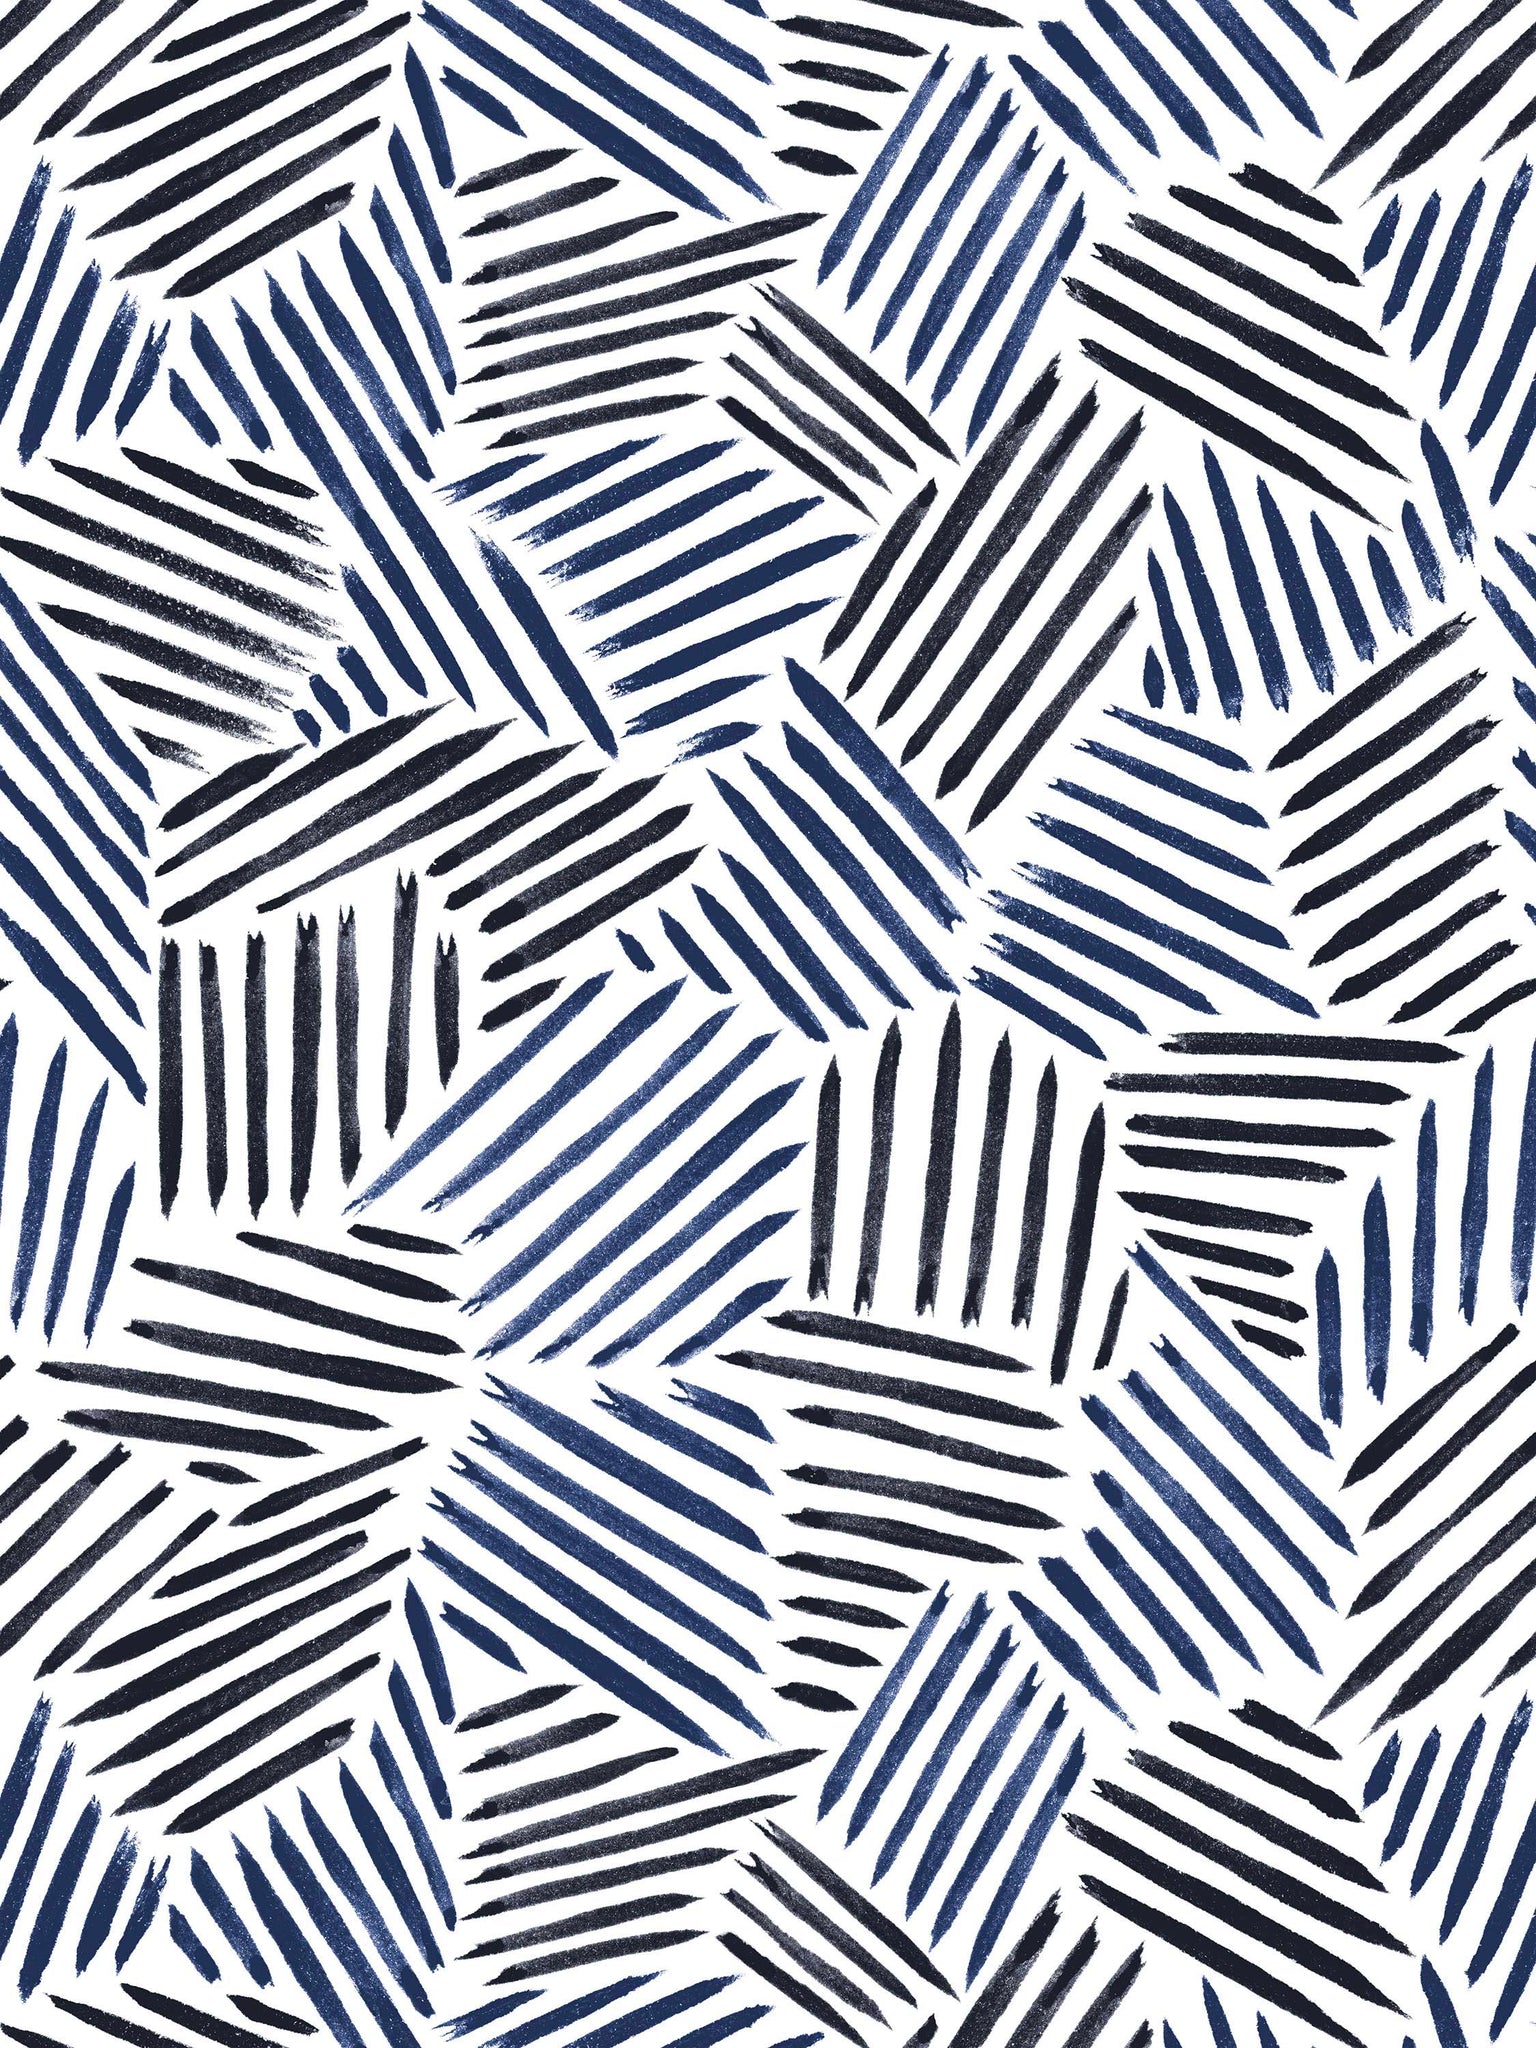 This wallpaper, inspired by New York artist Jasper Johns and the Bloomsbury Group, combines repeating black and navy blue brushstrokes to create a modern, abstract striped design